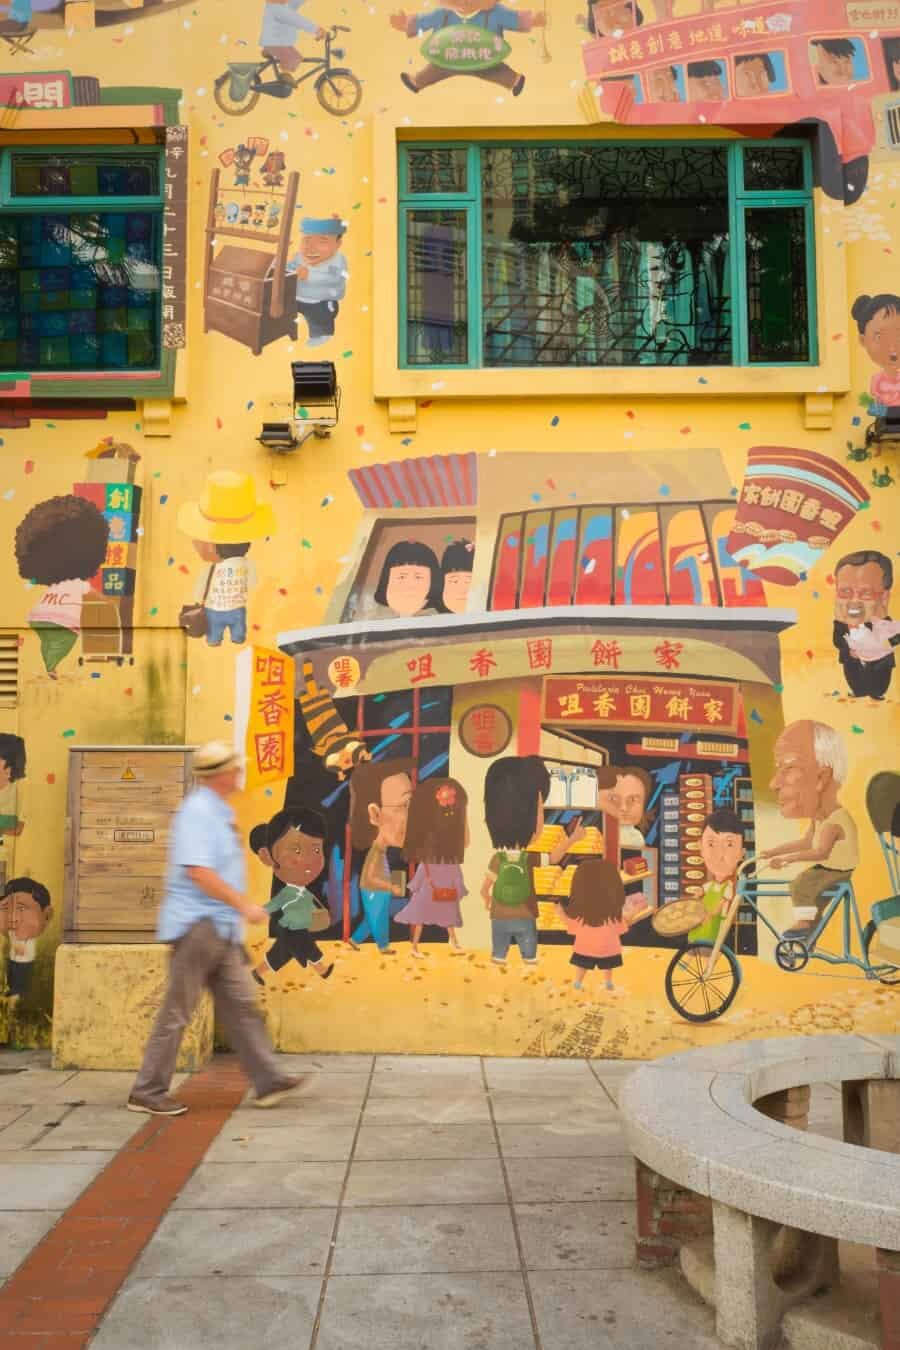 Taipa village Photography Locations, a guide to great photo spots in Macau